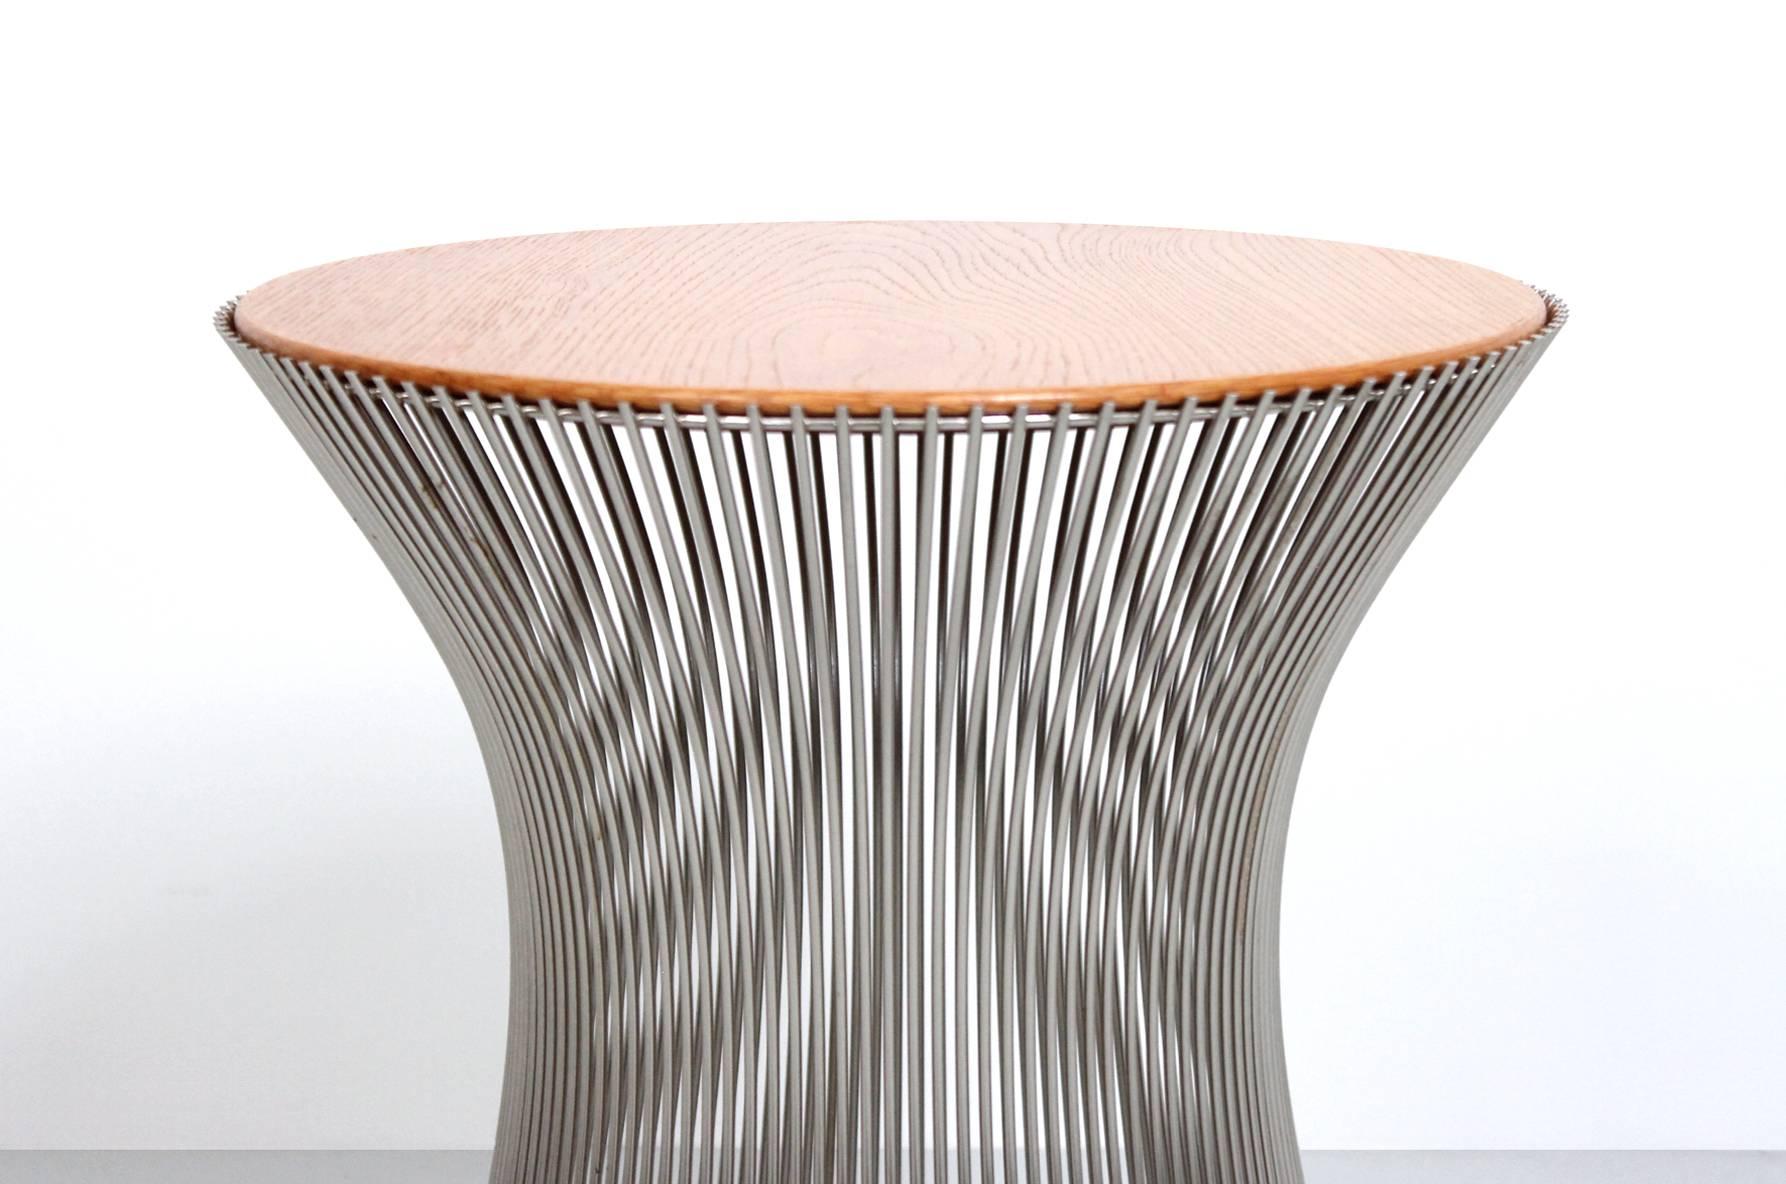 Pair of Side Tables by Warren Platner for Knoll (Chrom)